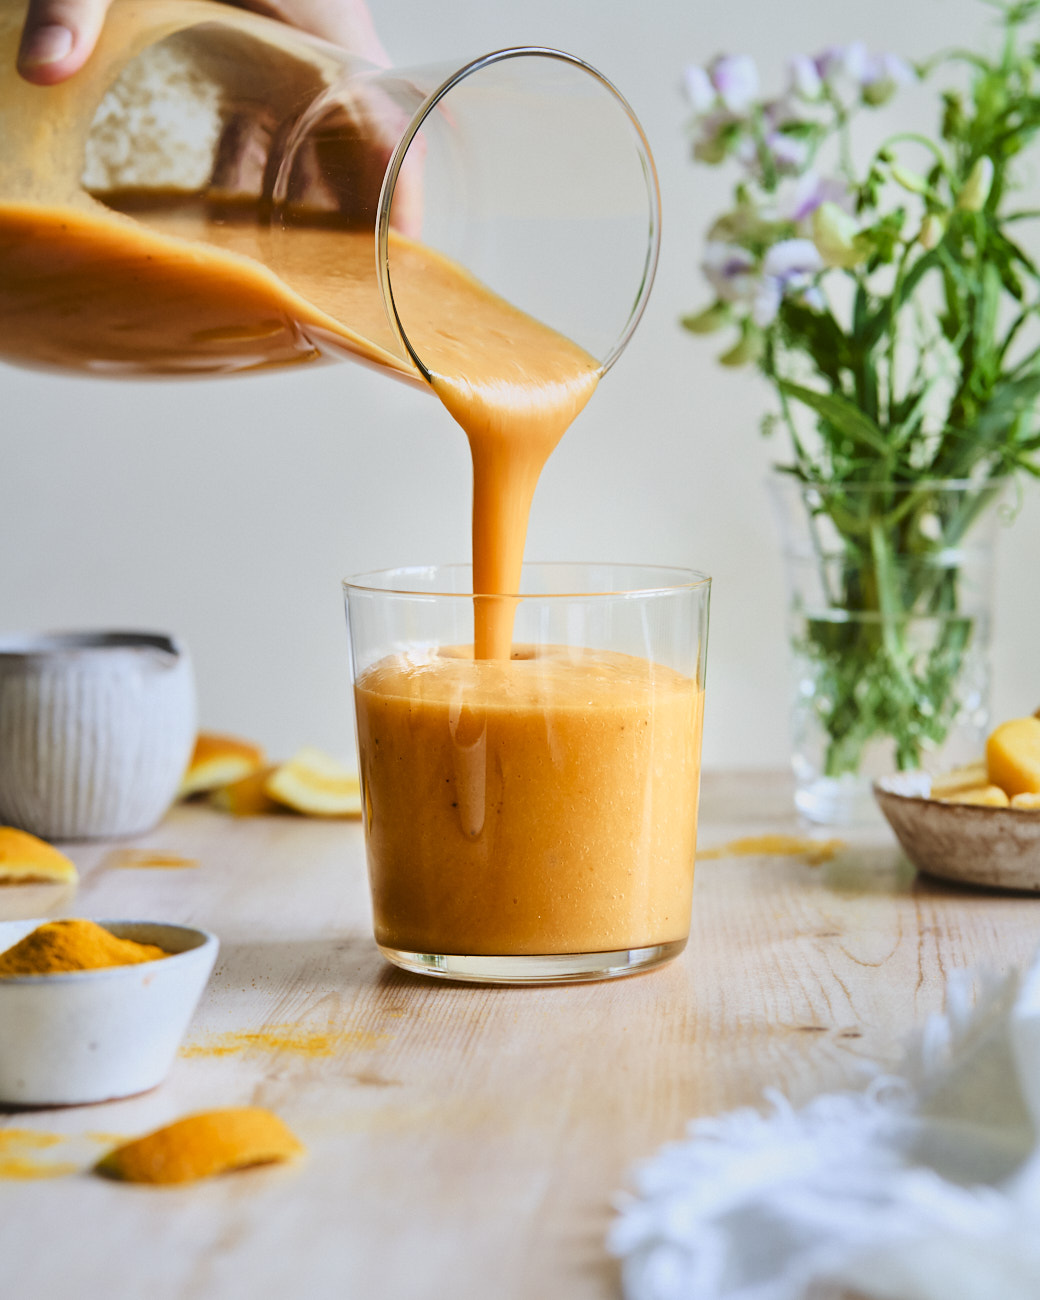 Fiery Golden Smoothie with Carrot, Orange and Ginger - Good Eatings